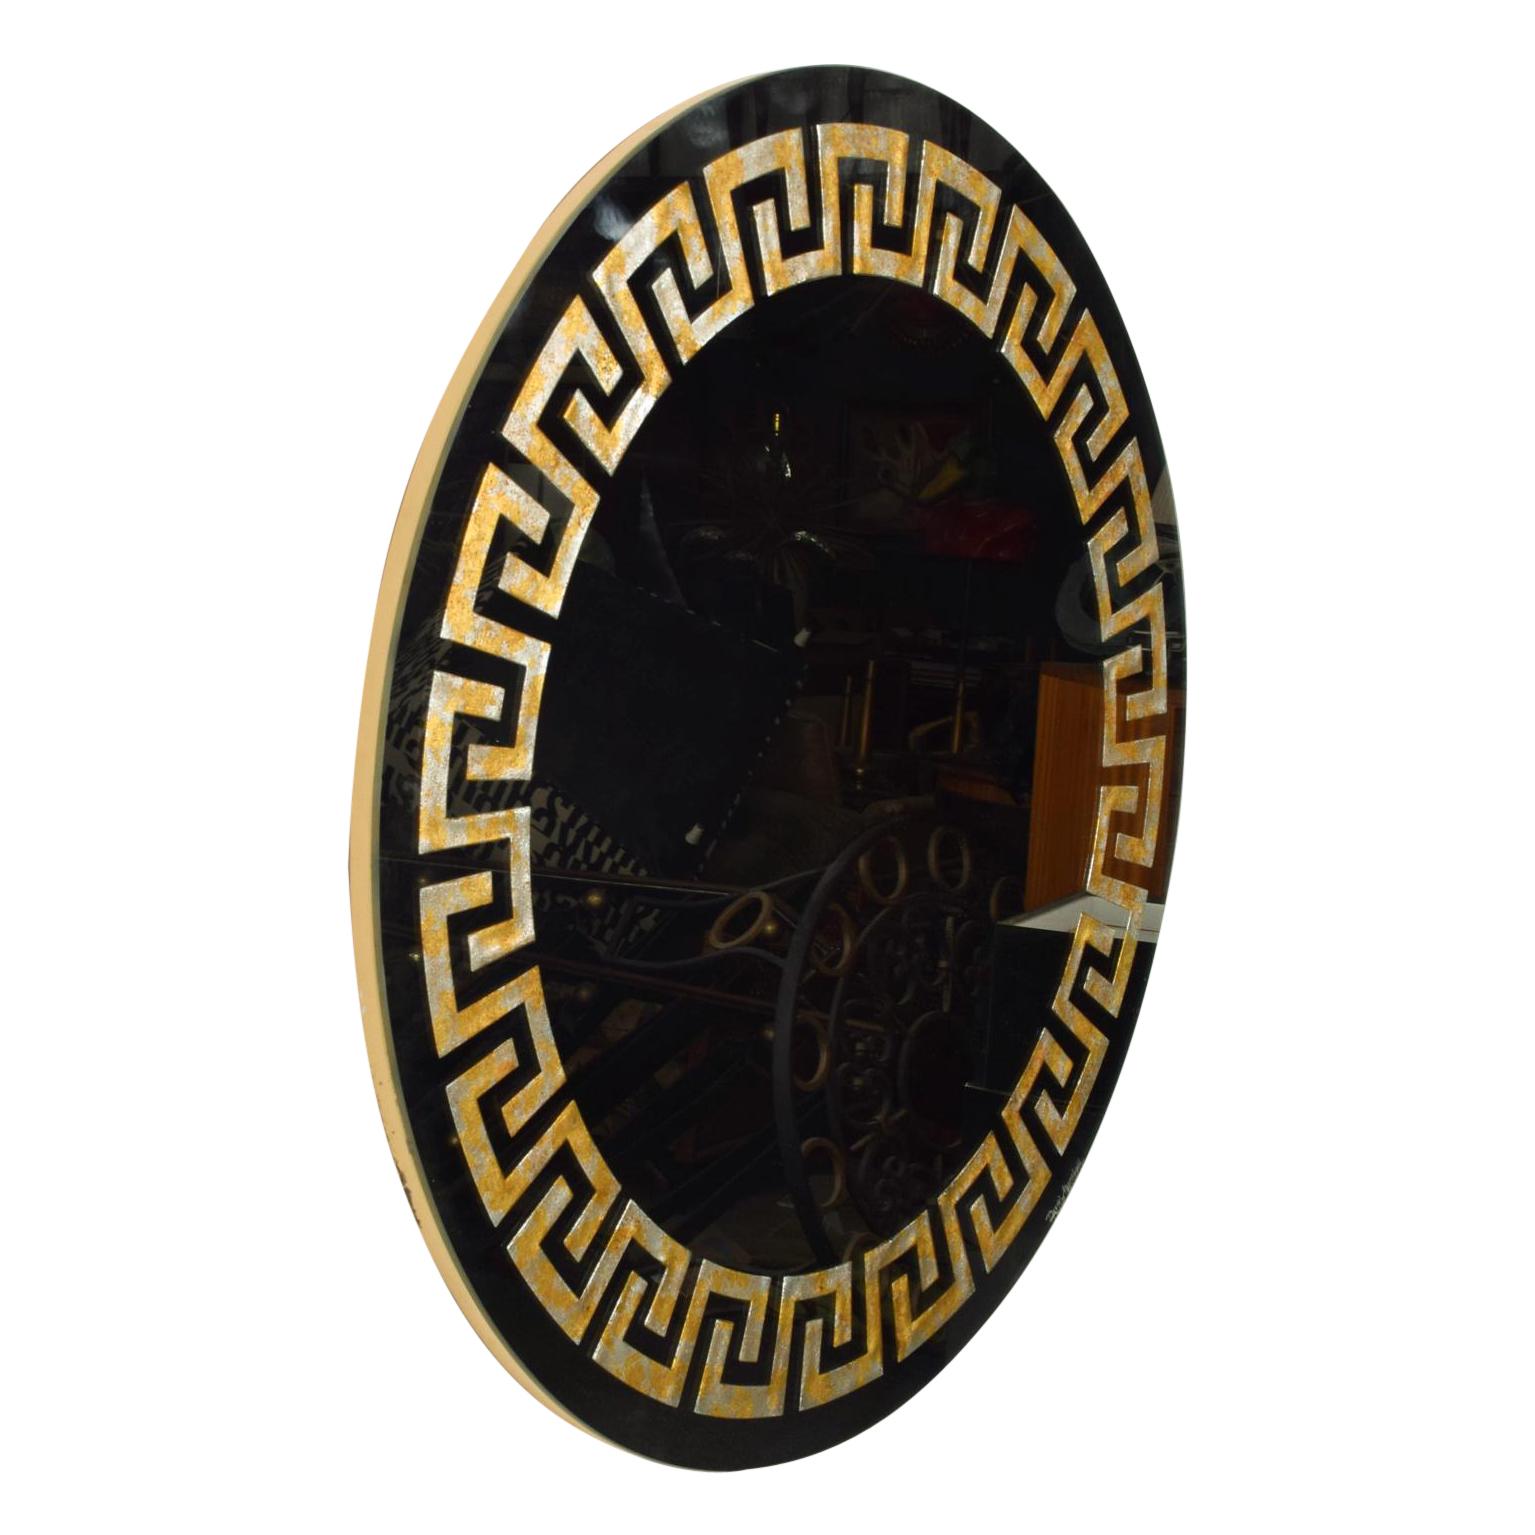 1970s David Marshall Round Wall Mirror Églomisé Greek Key SPAIN
30 in diameter x 0.63 thick.
Original vintage unrestored condition.
Signed on one side.
Refer to images.

